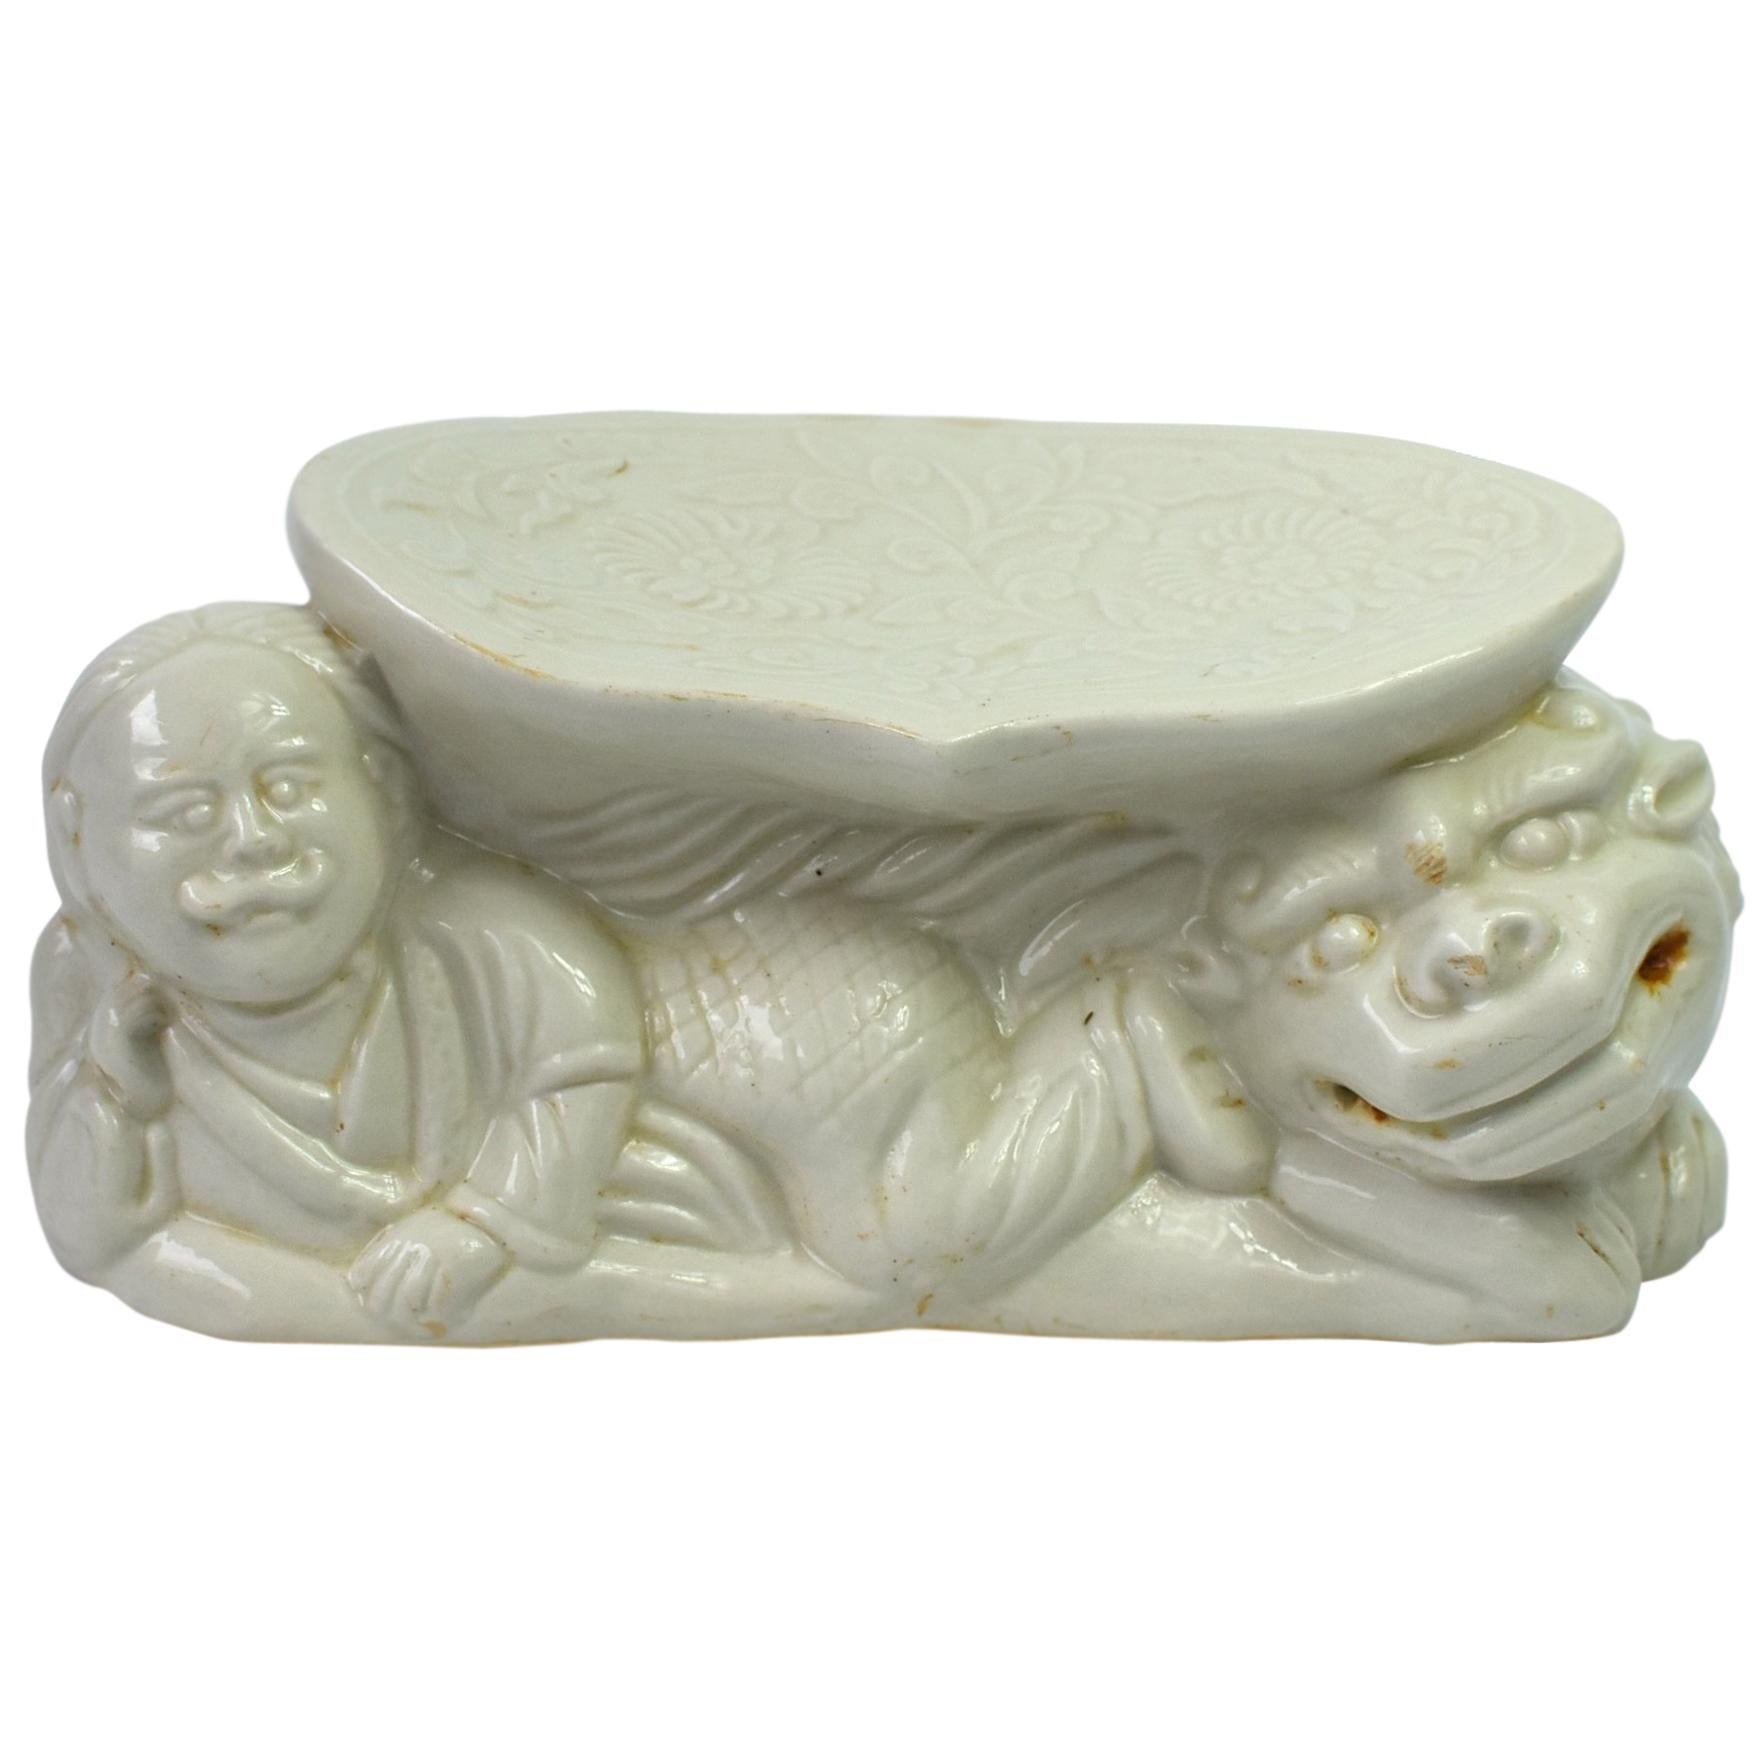 Ding Kiln Ceramic Pillow Song Style Man and Foo Dog For Sale